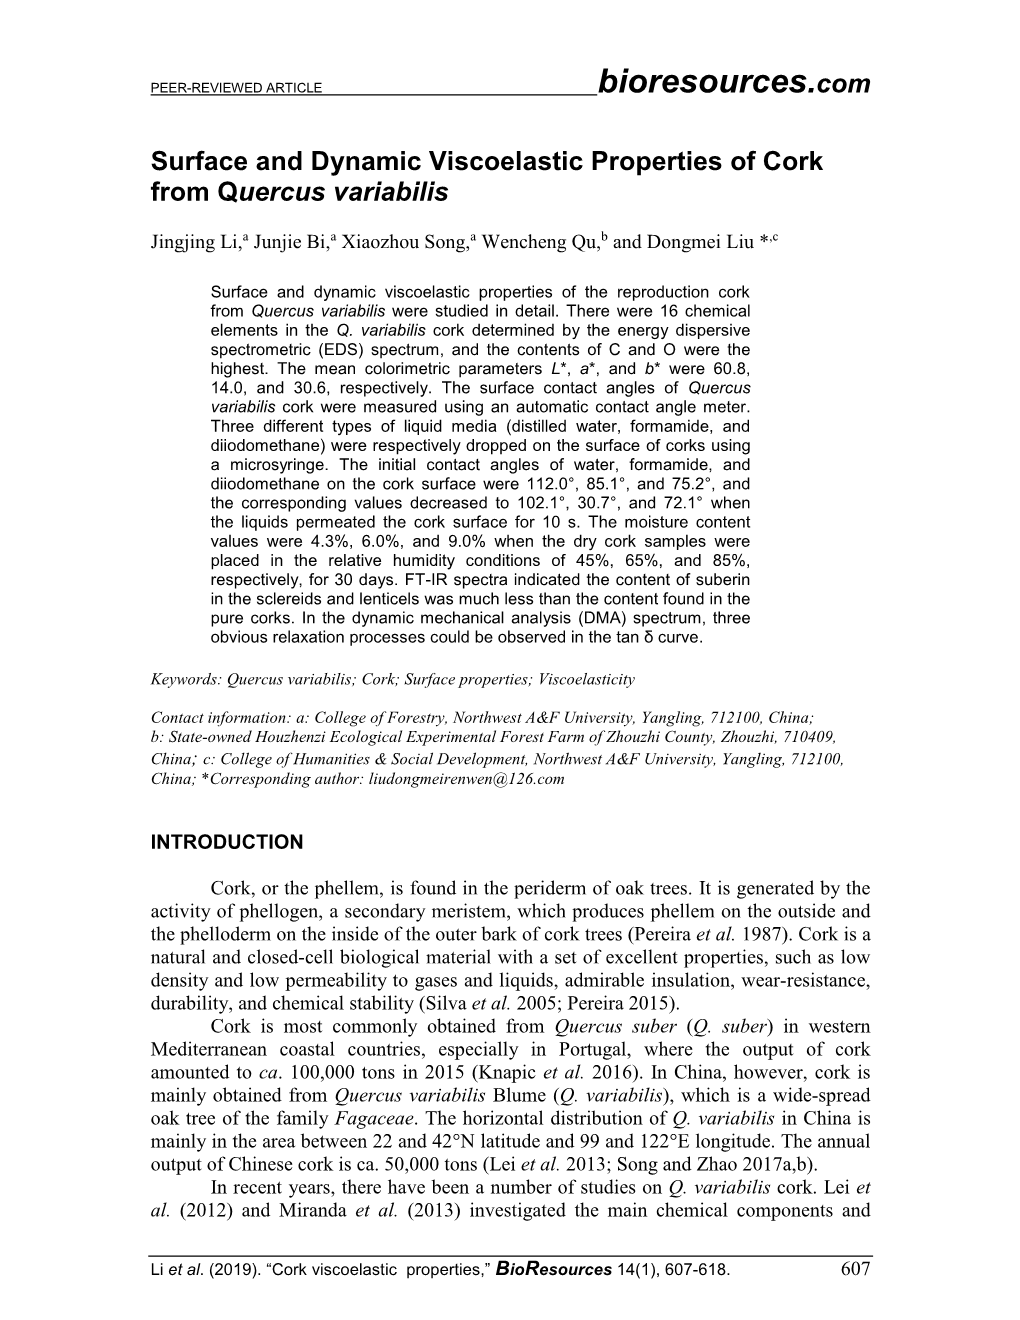 Surface and Dynamic Viscoelastic Properties of Cork from Quercus Variabilis